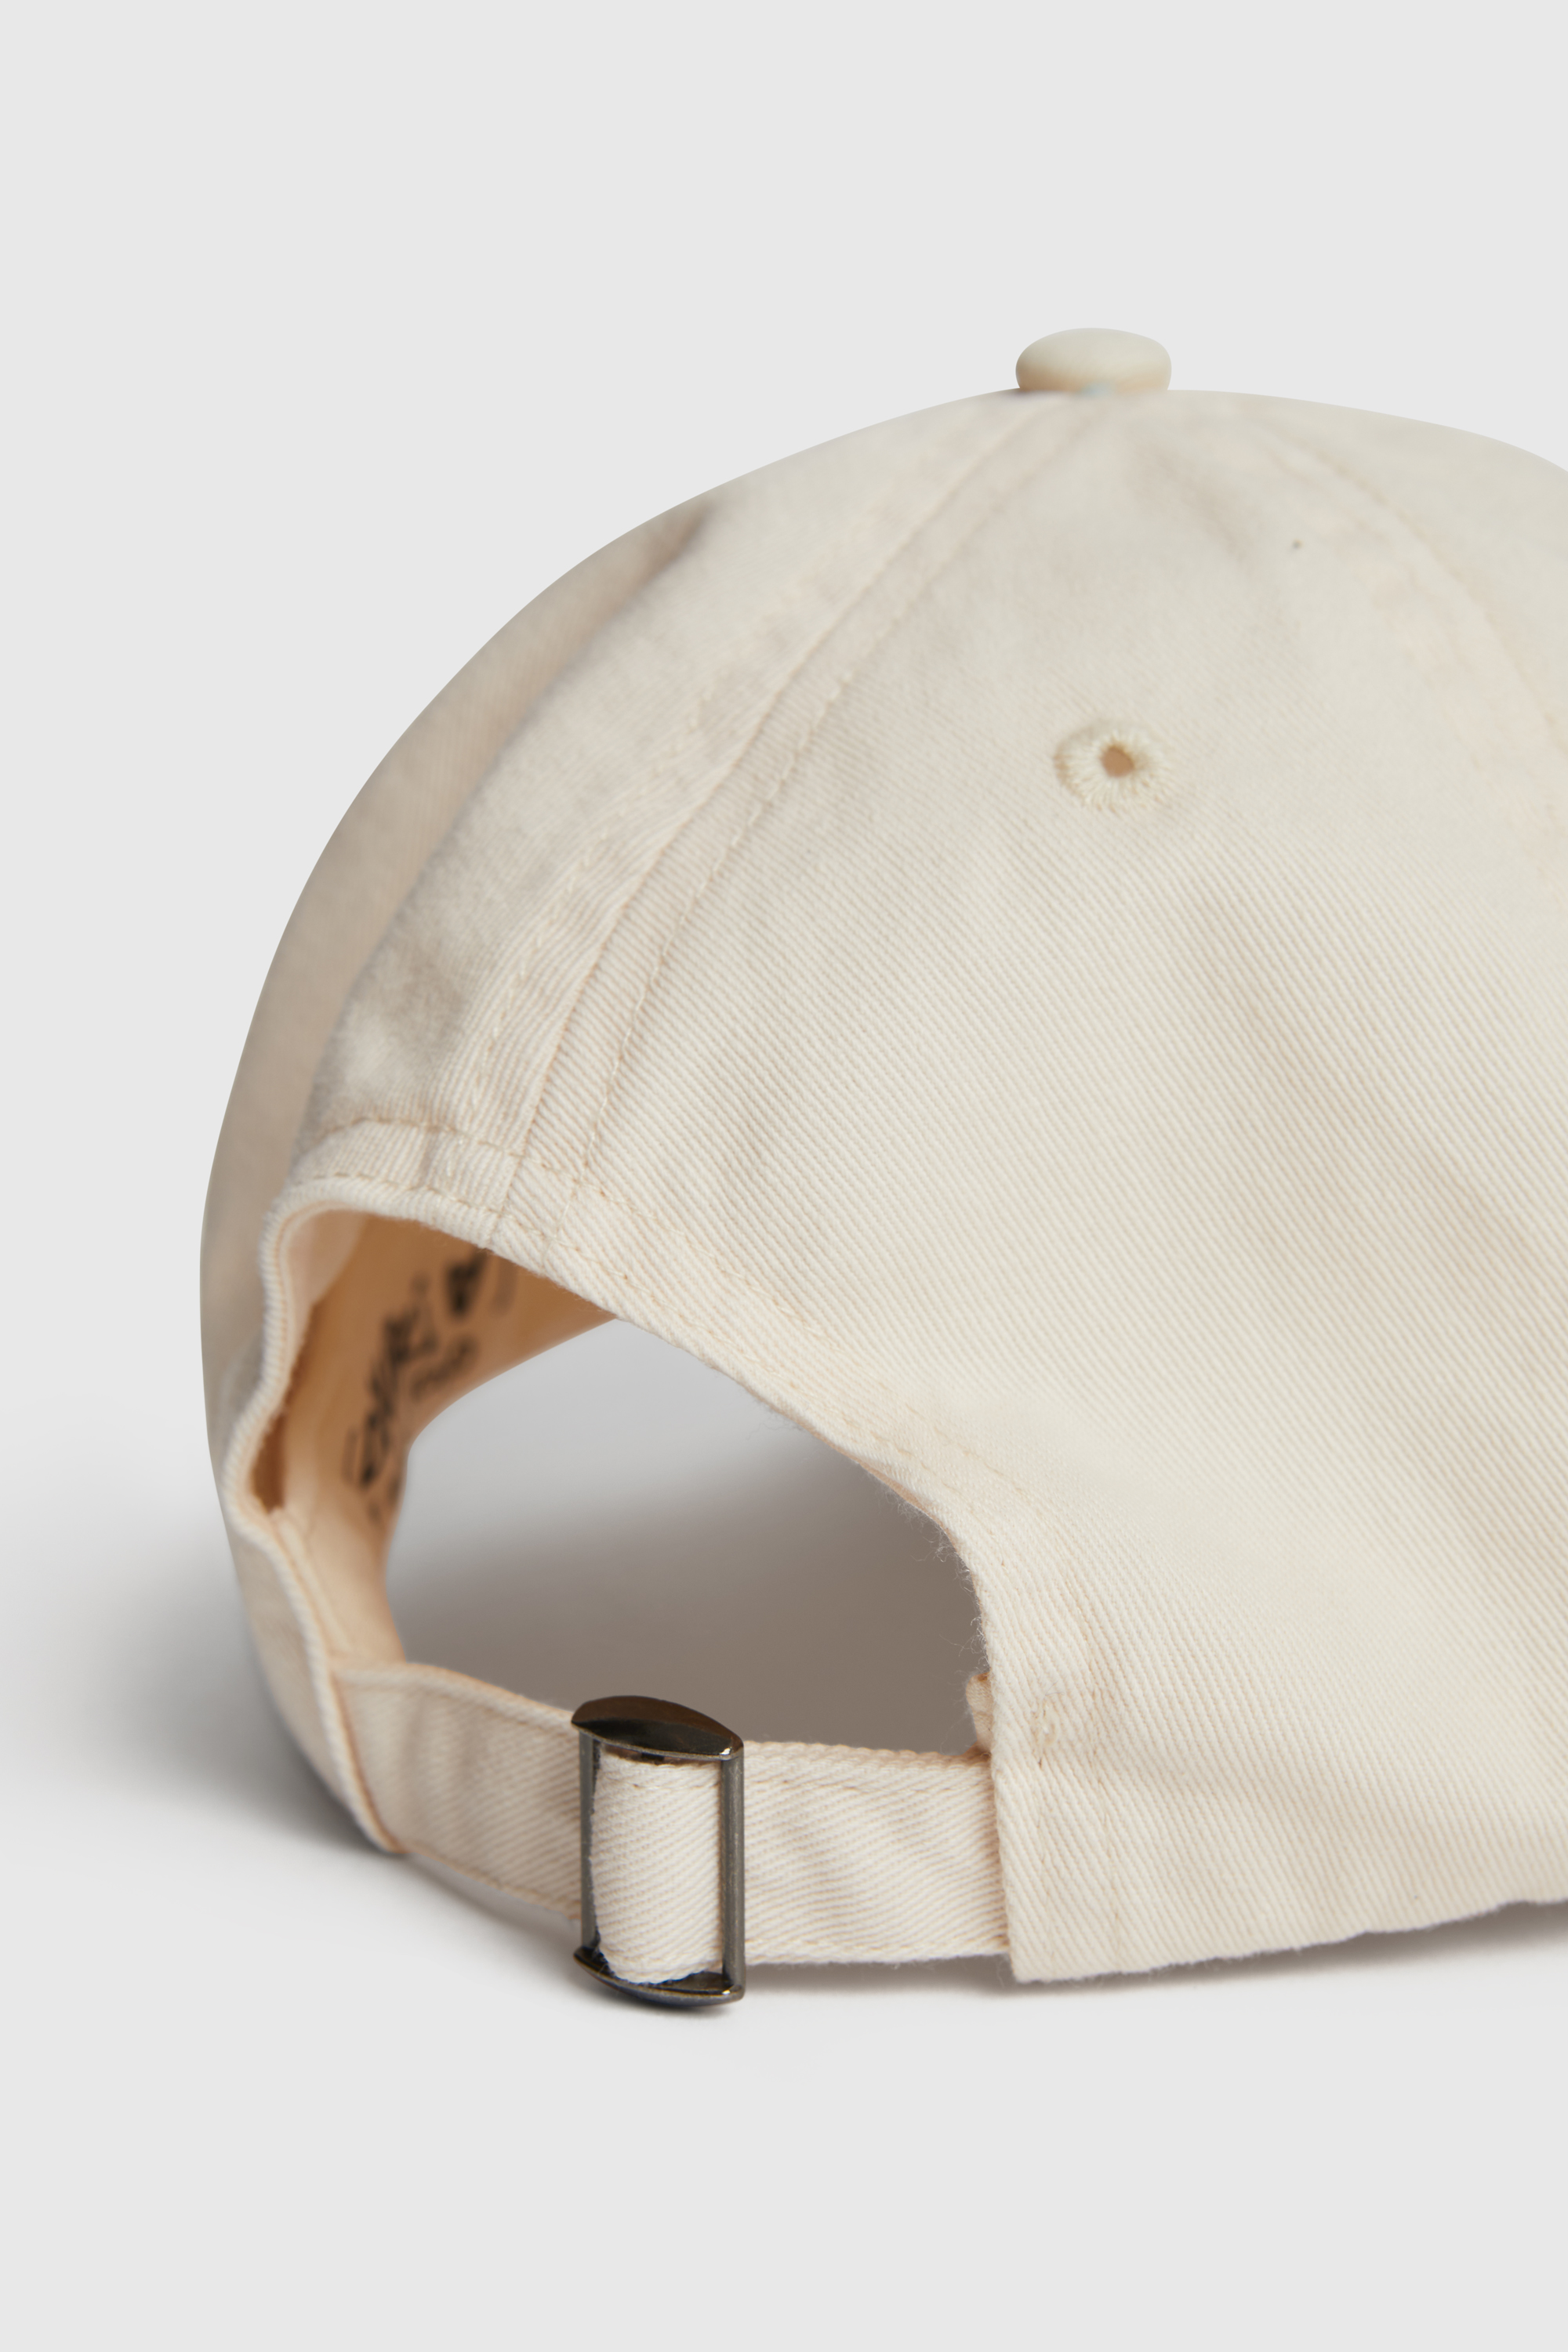 Double A by Wood Wood Eli embroidery cap Off-white | WoodWood.com